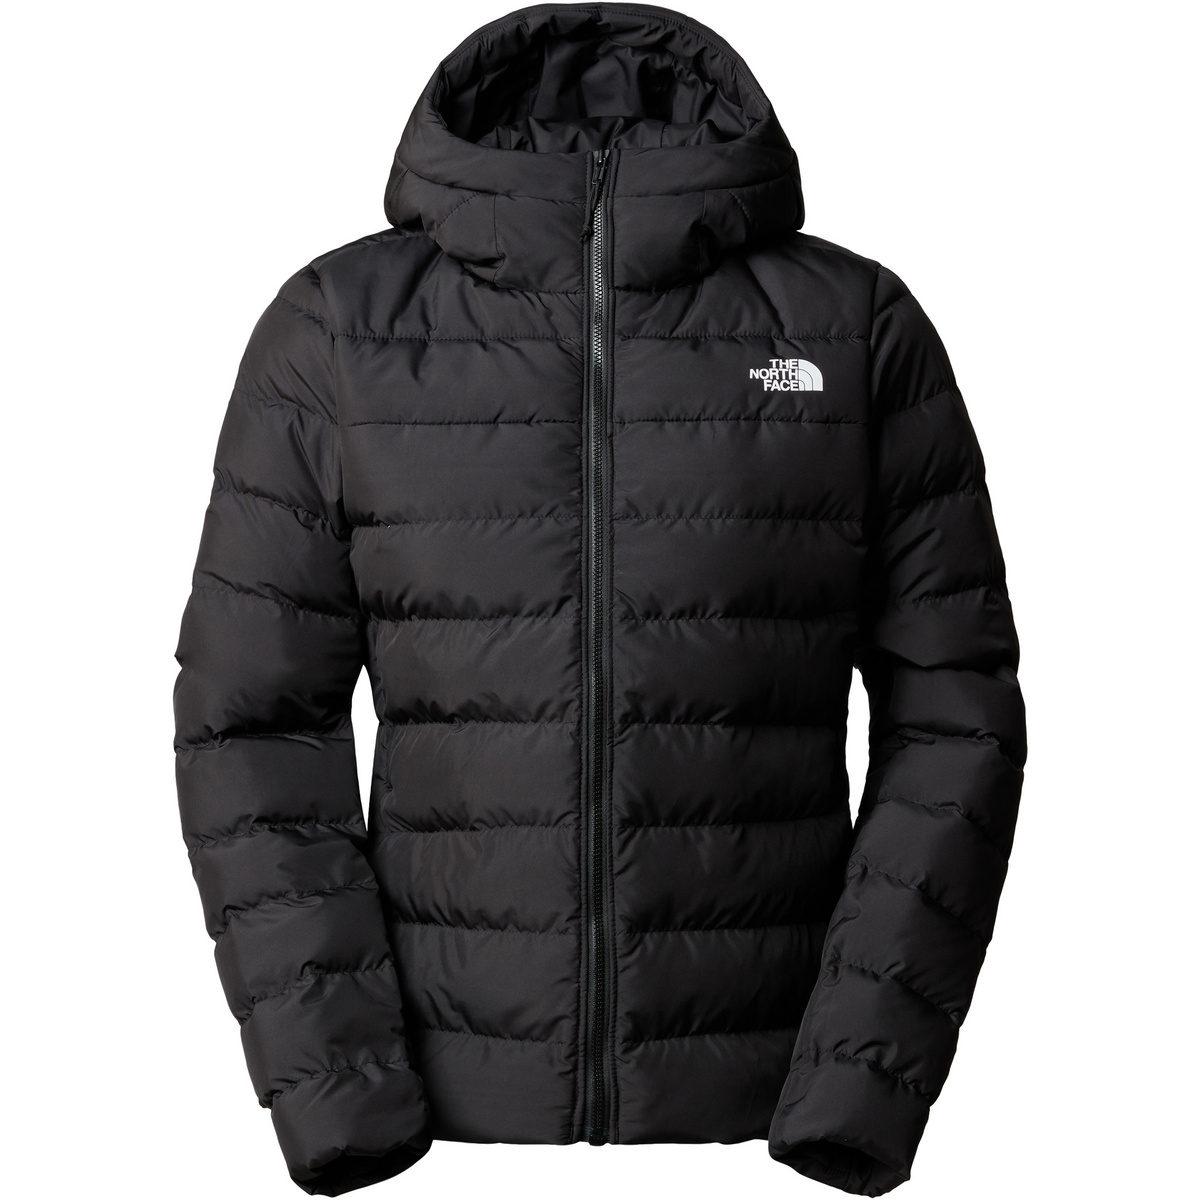 The North Face Damen Aconcagua 3 Hoodie Jacke von The North Face